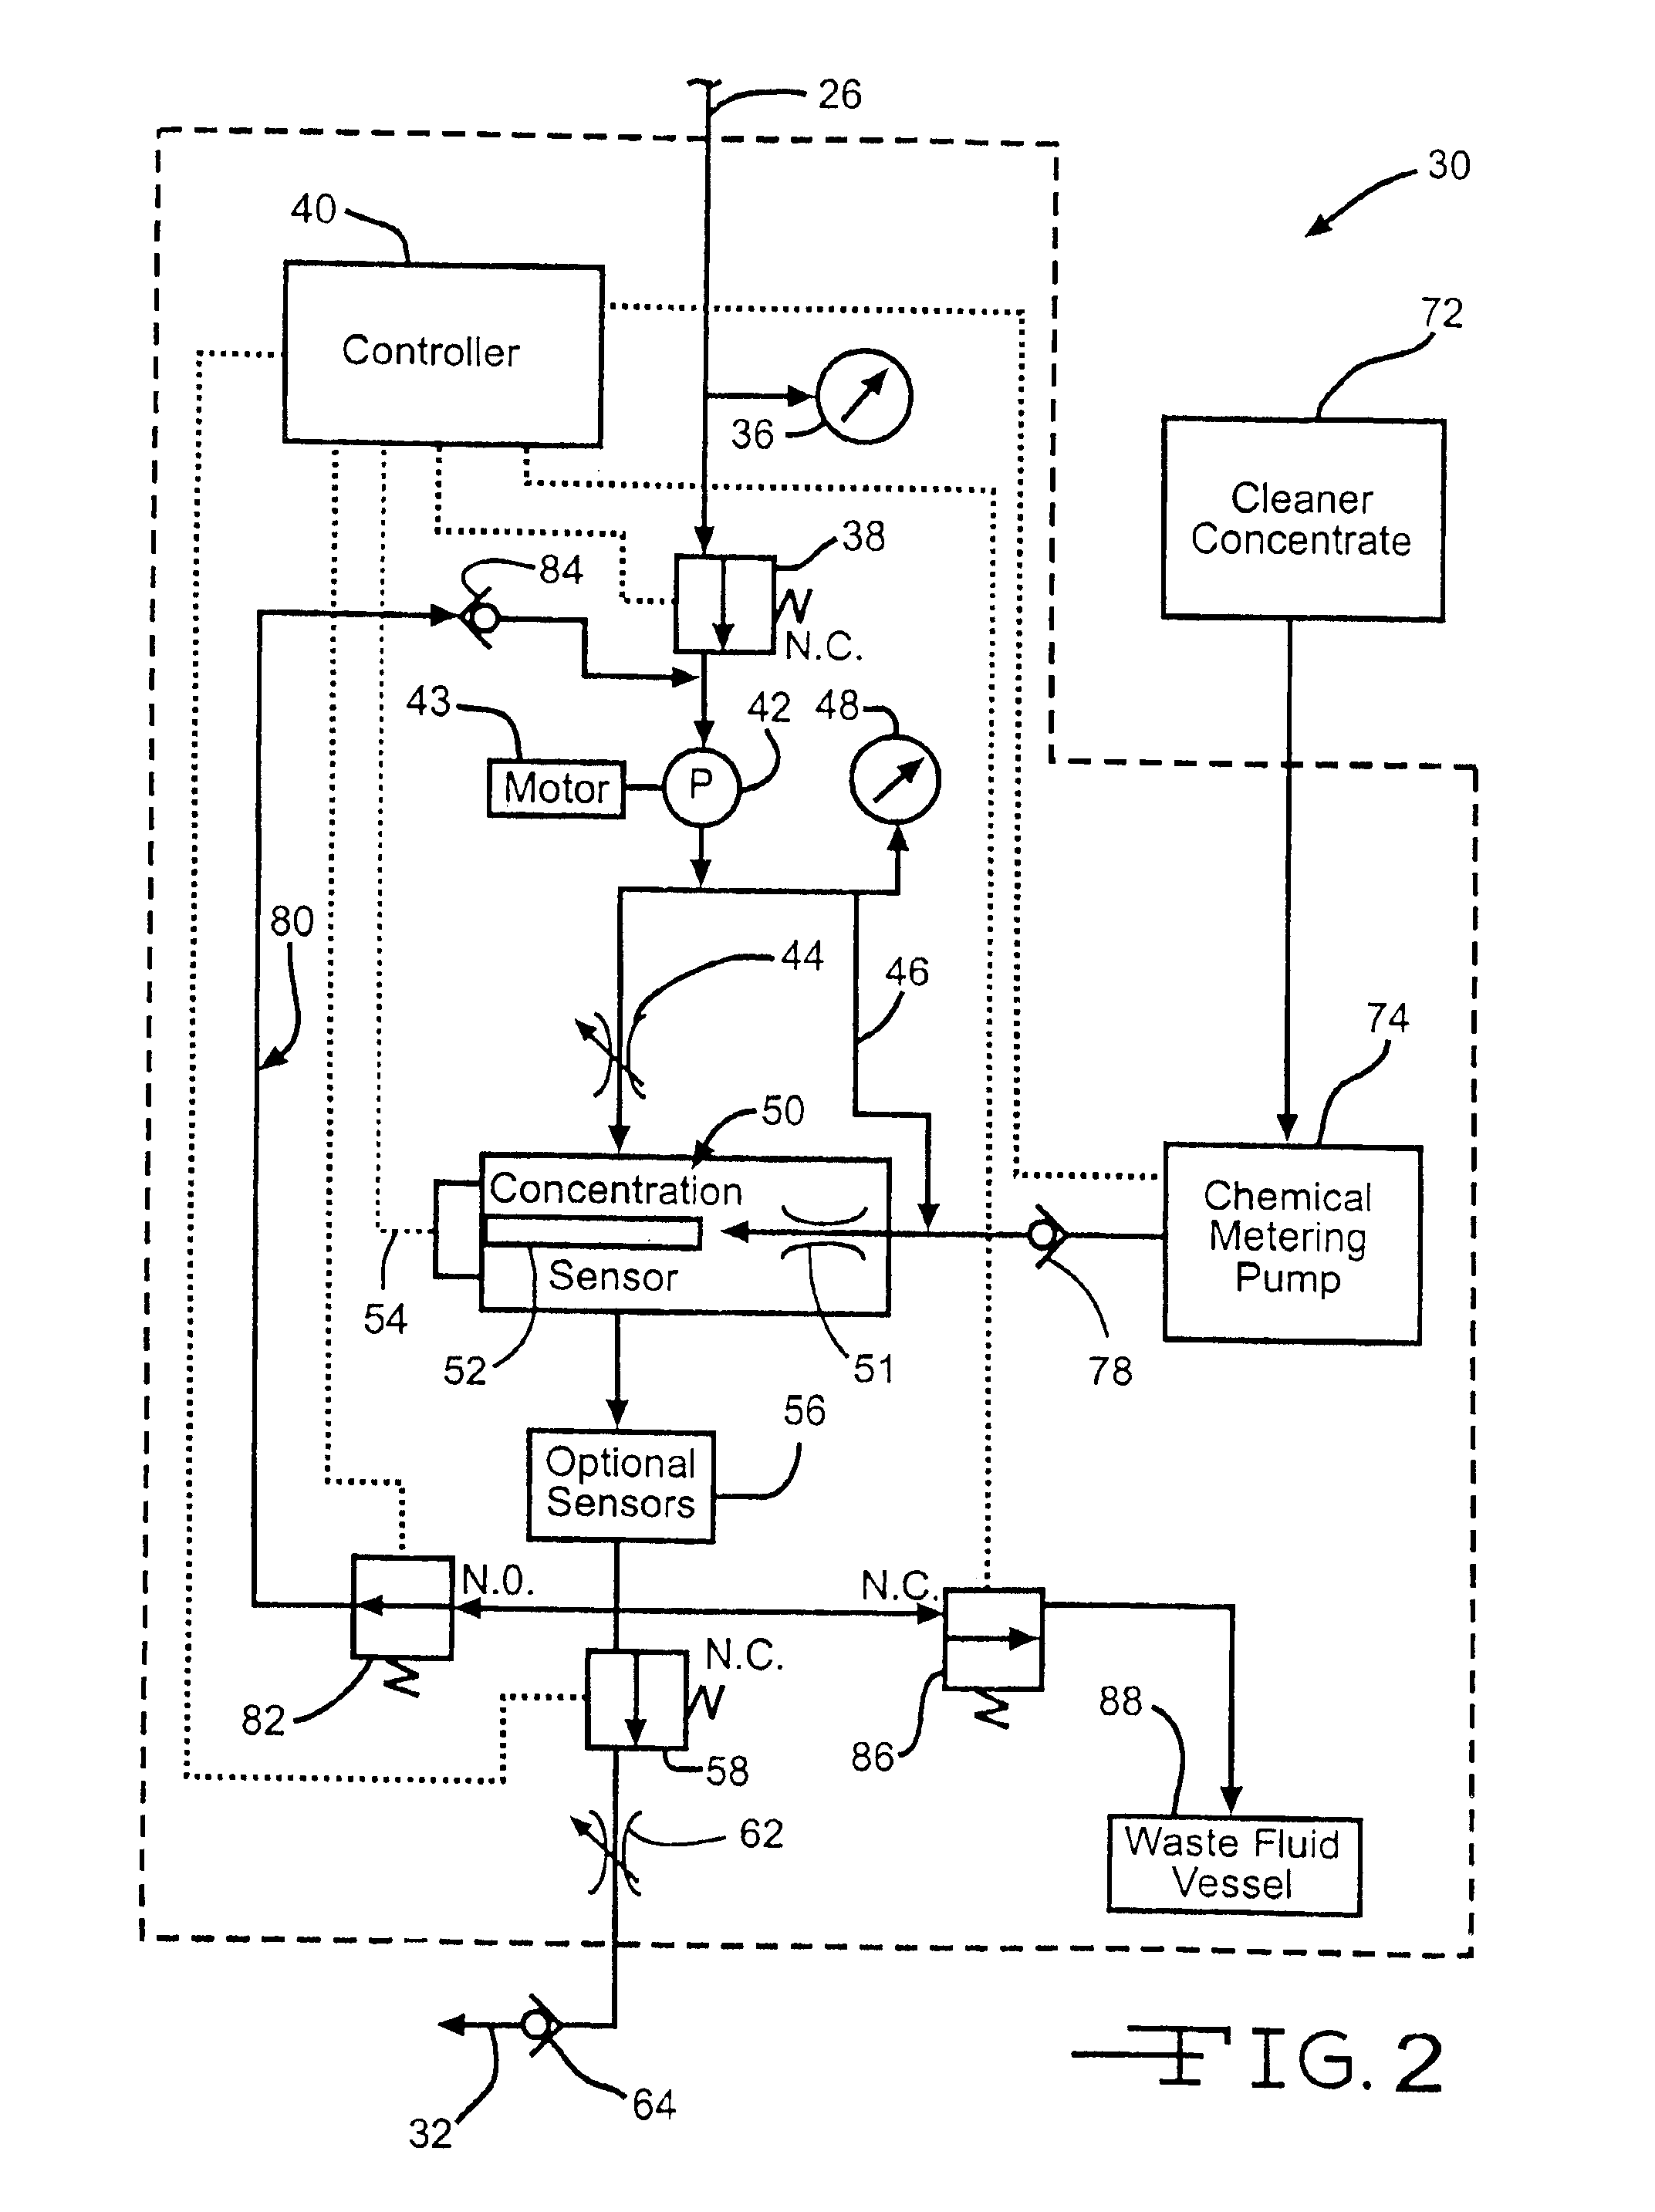 Method and apparatus for measuring a variable in a lubricant/coolant system